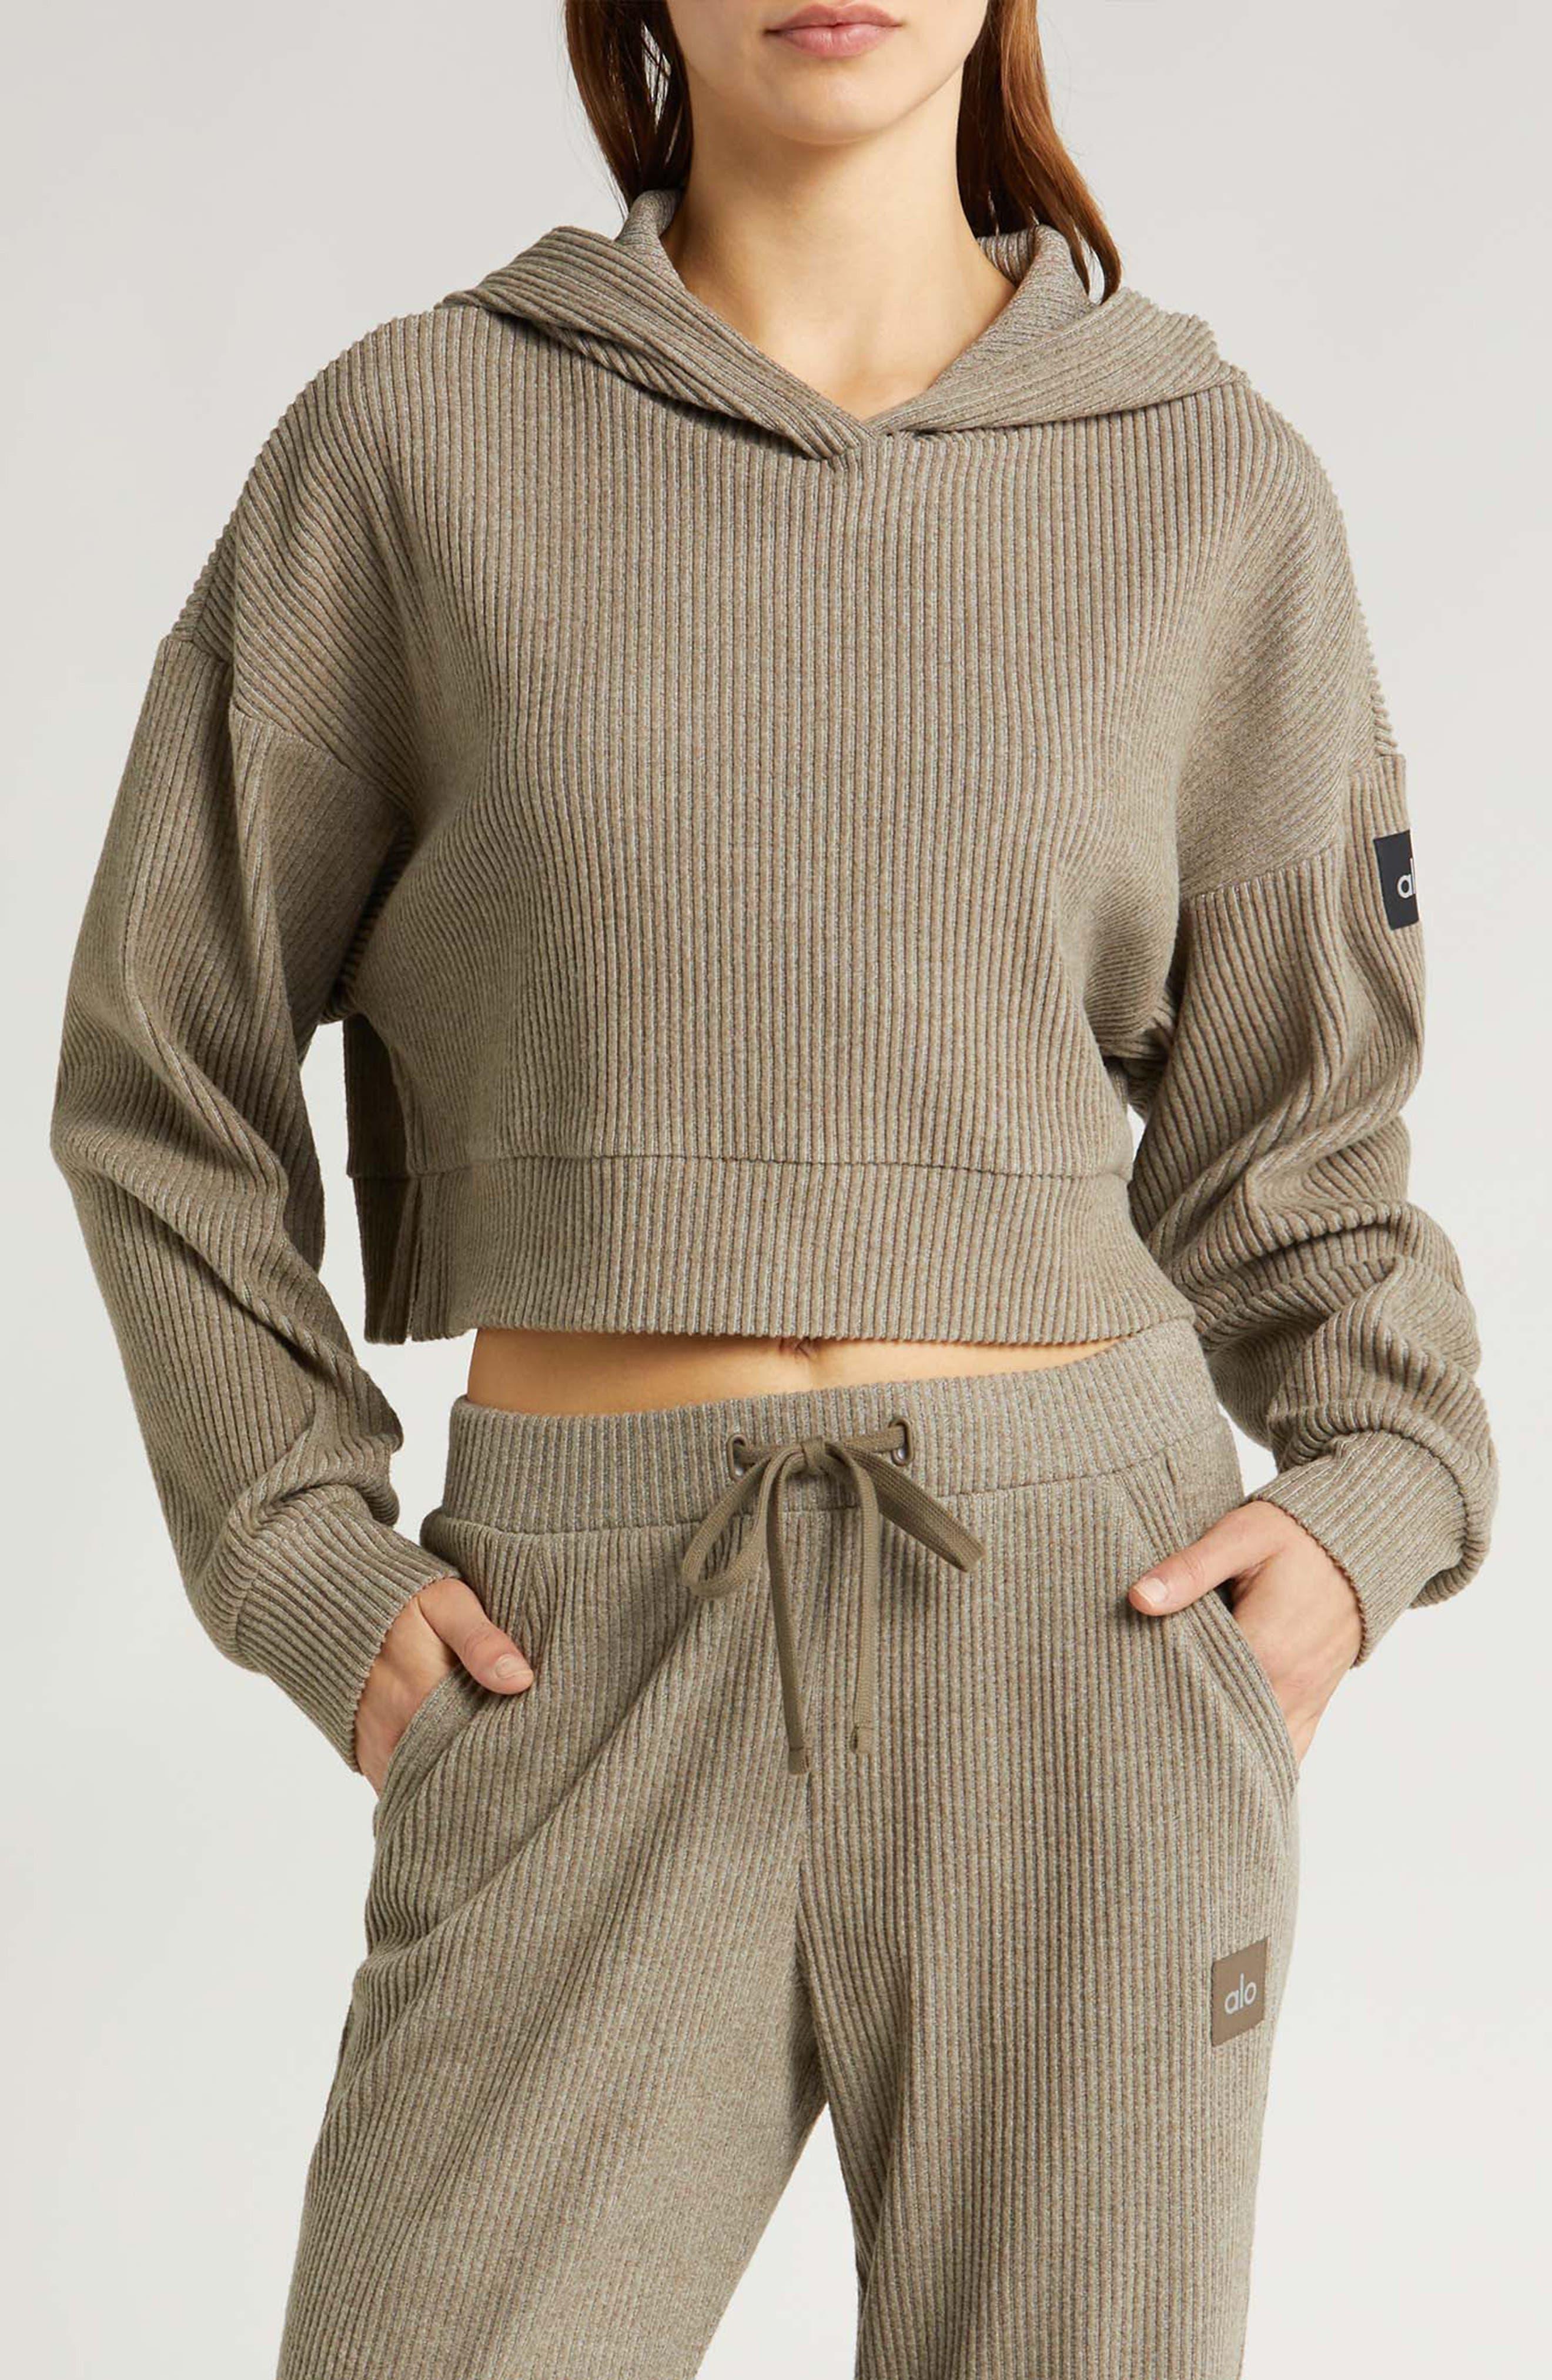 Alo Muse Ribbed Crop Pullover in Blue Skies Heather